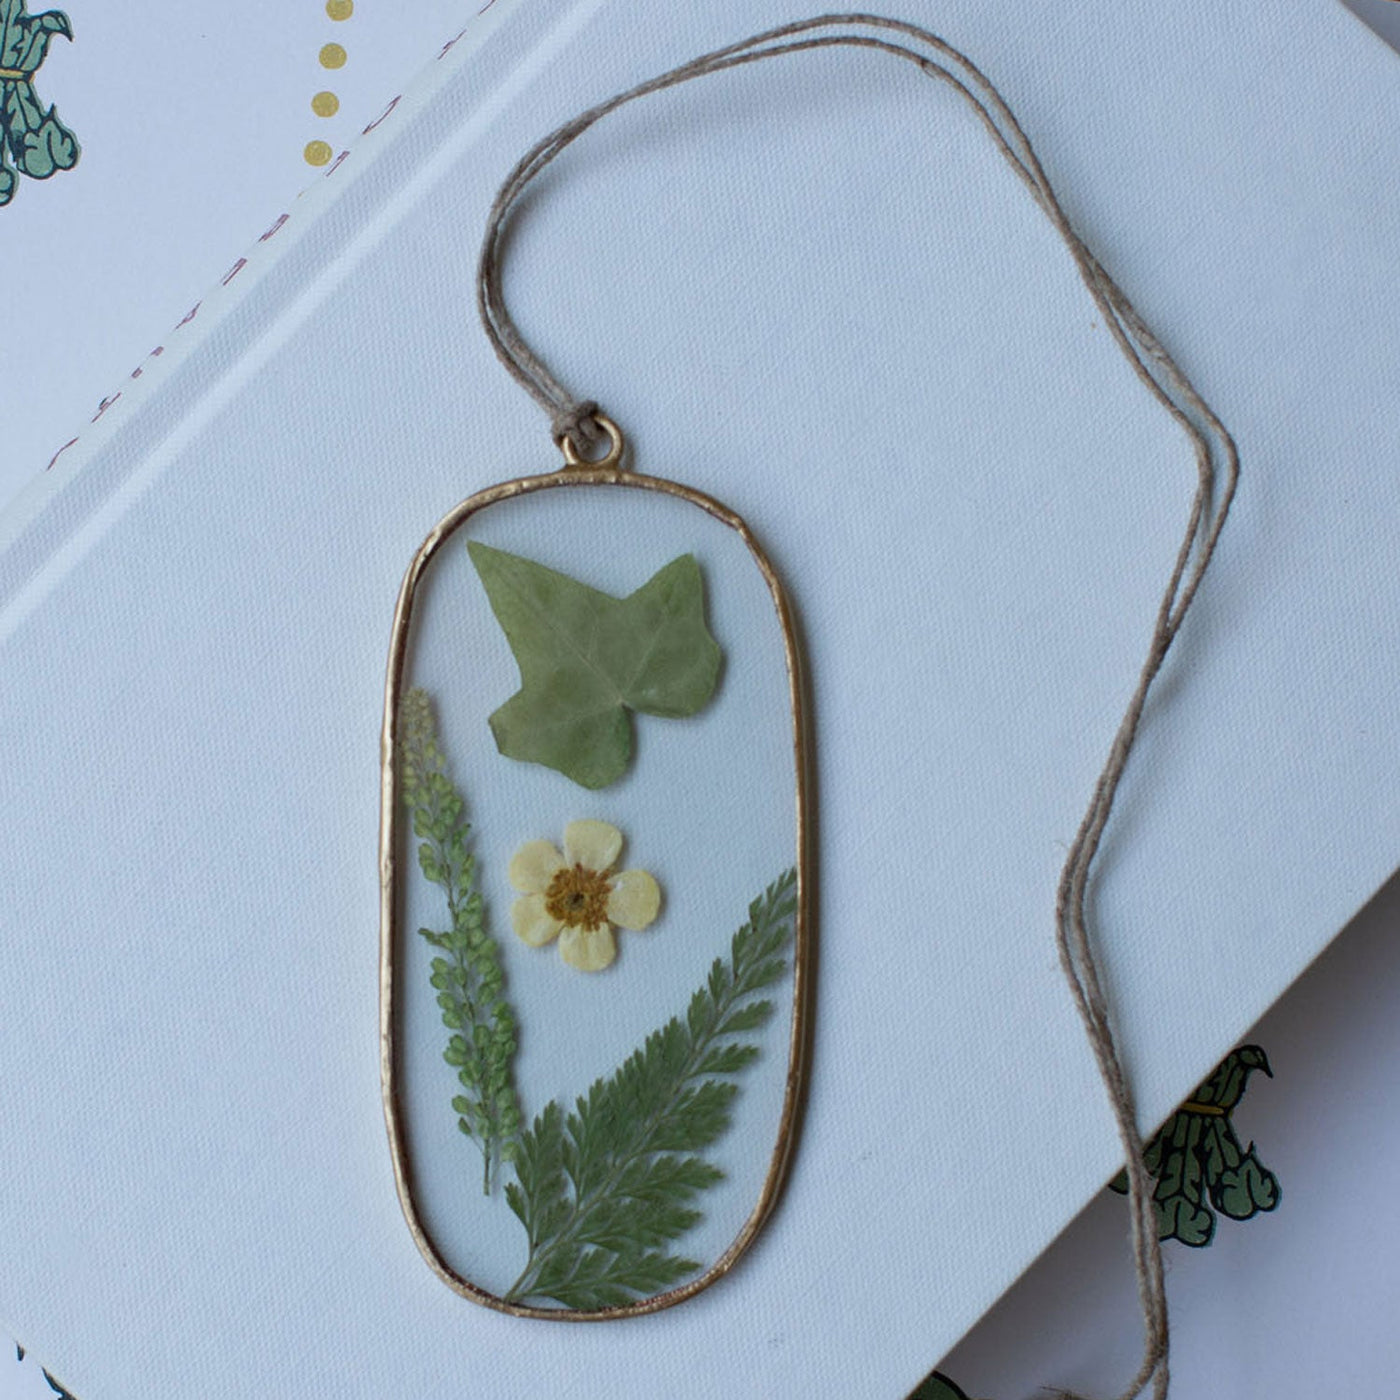 Buttercup Squoval Pressed Floral Pendant